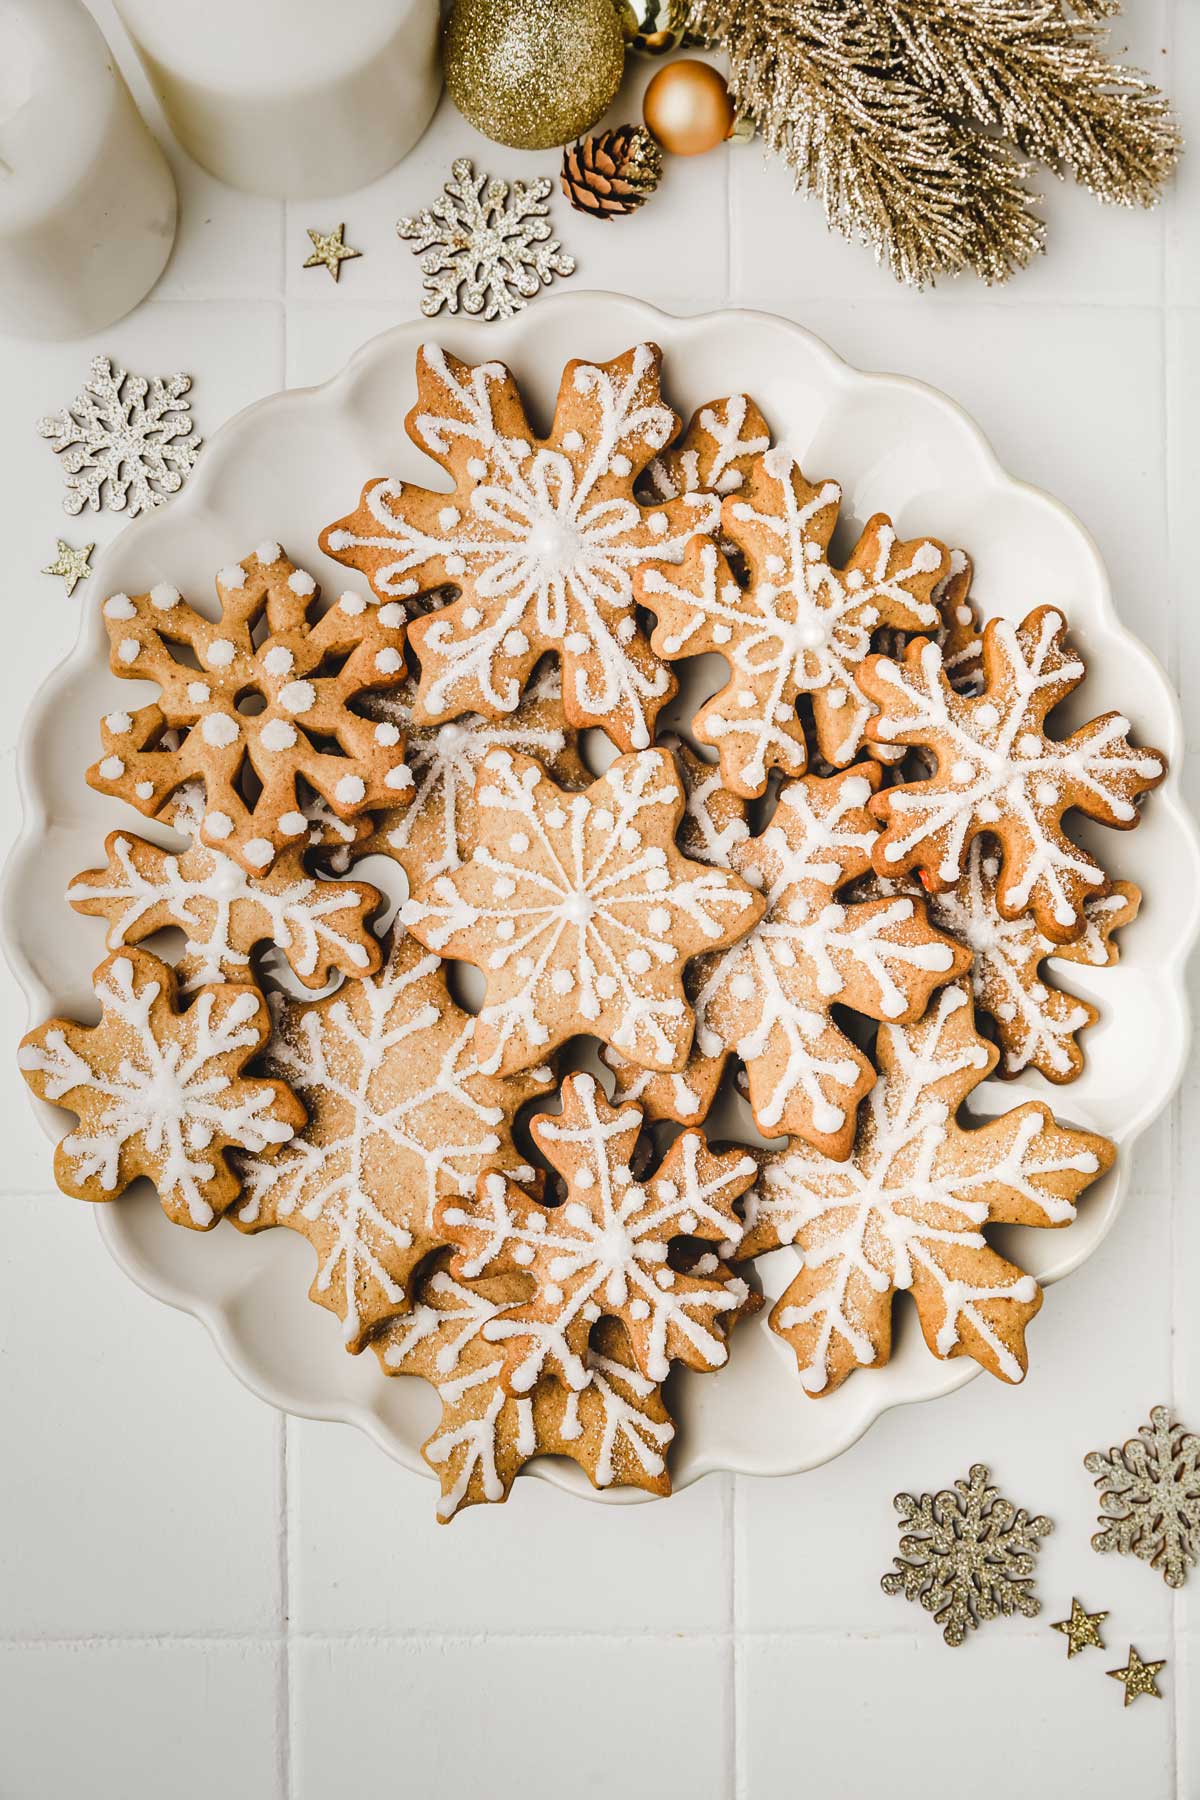 Snowflake cookies on a plate